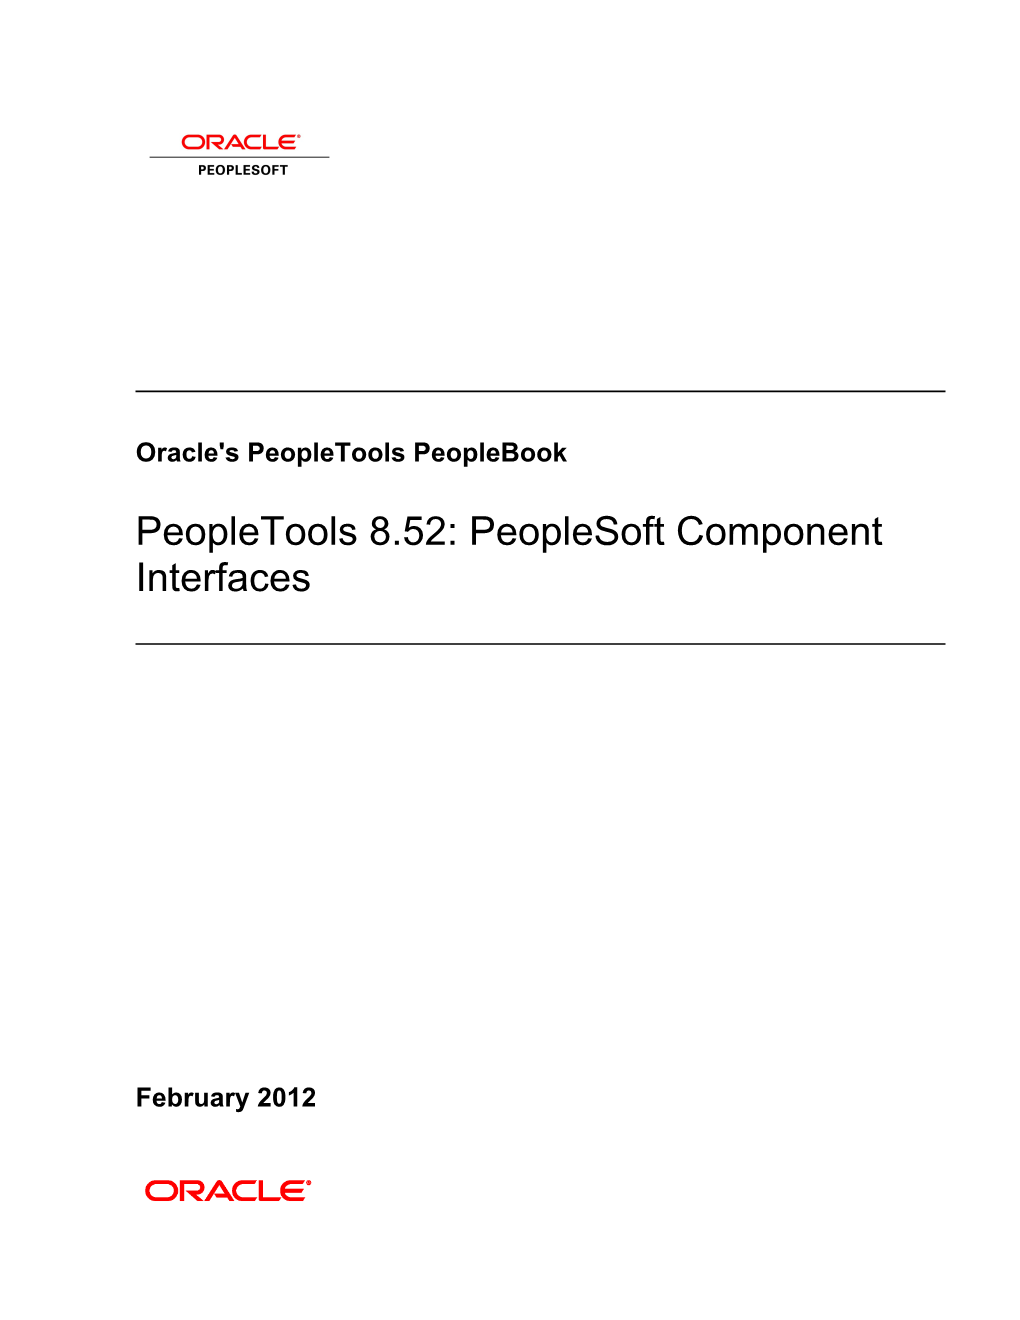 Peopletools 8.52: Peoplesoft Component Interfaces